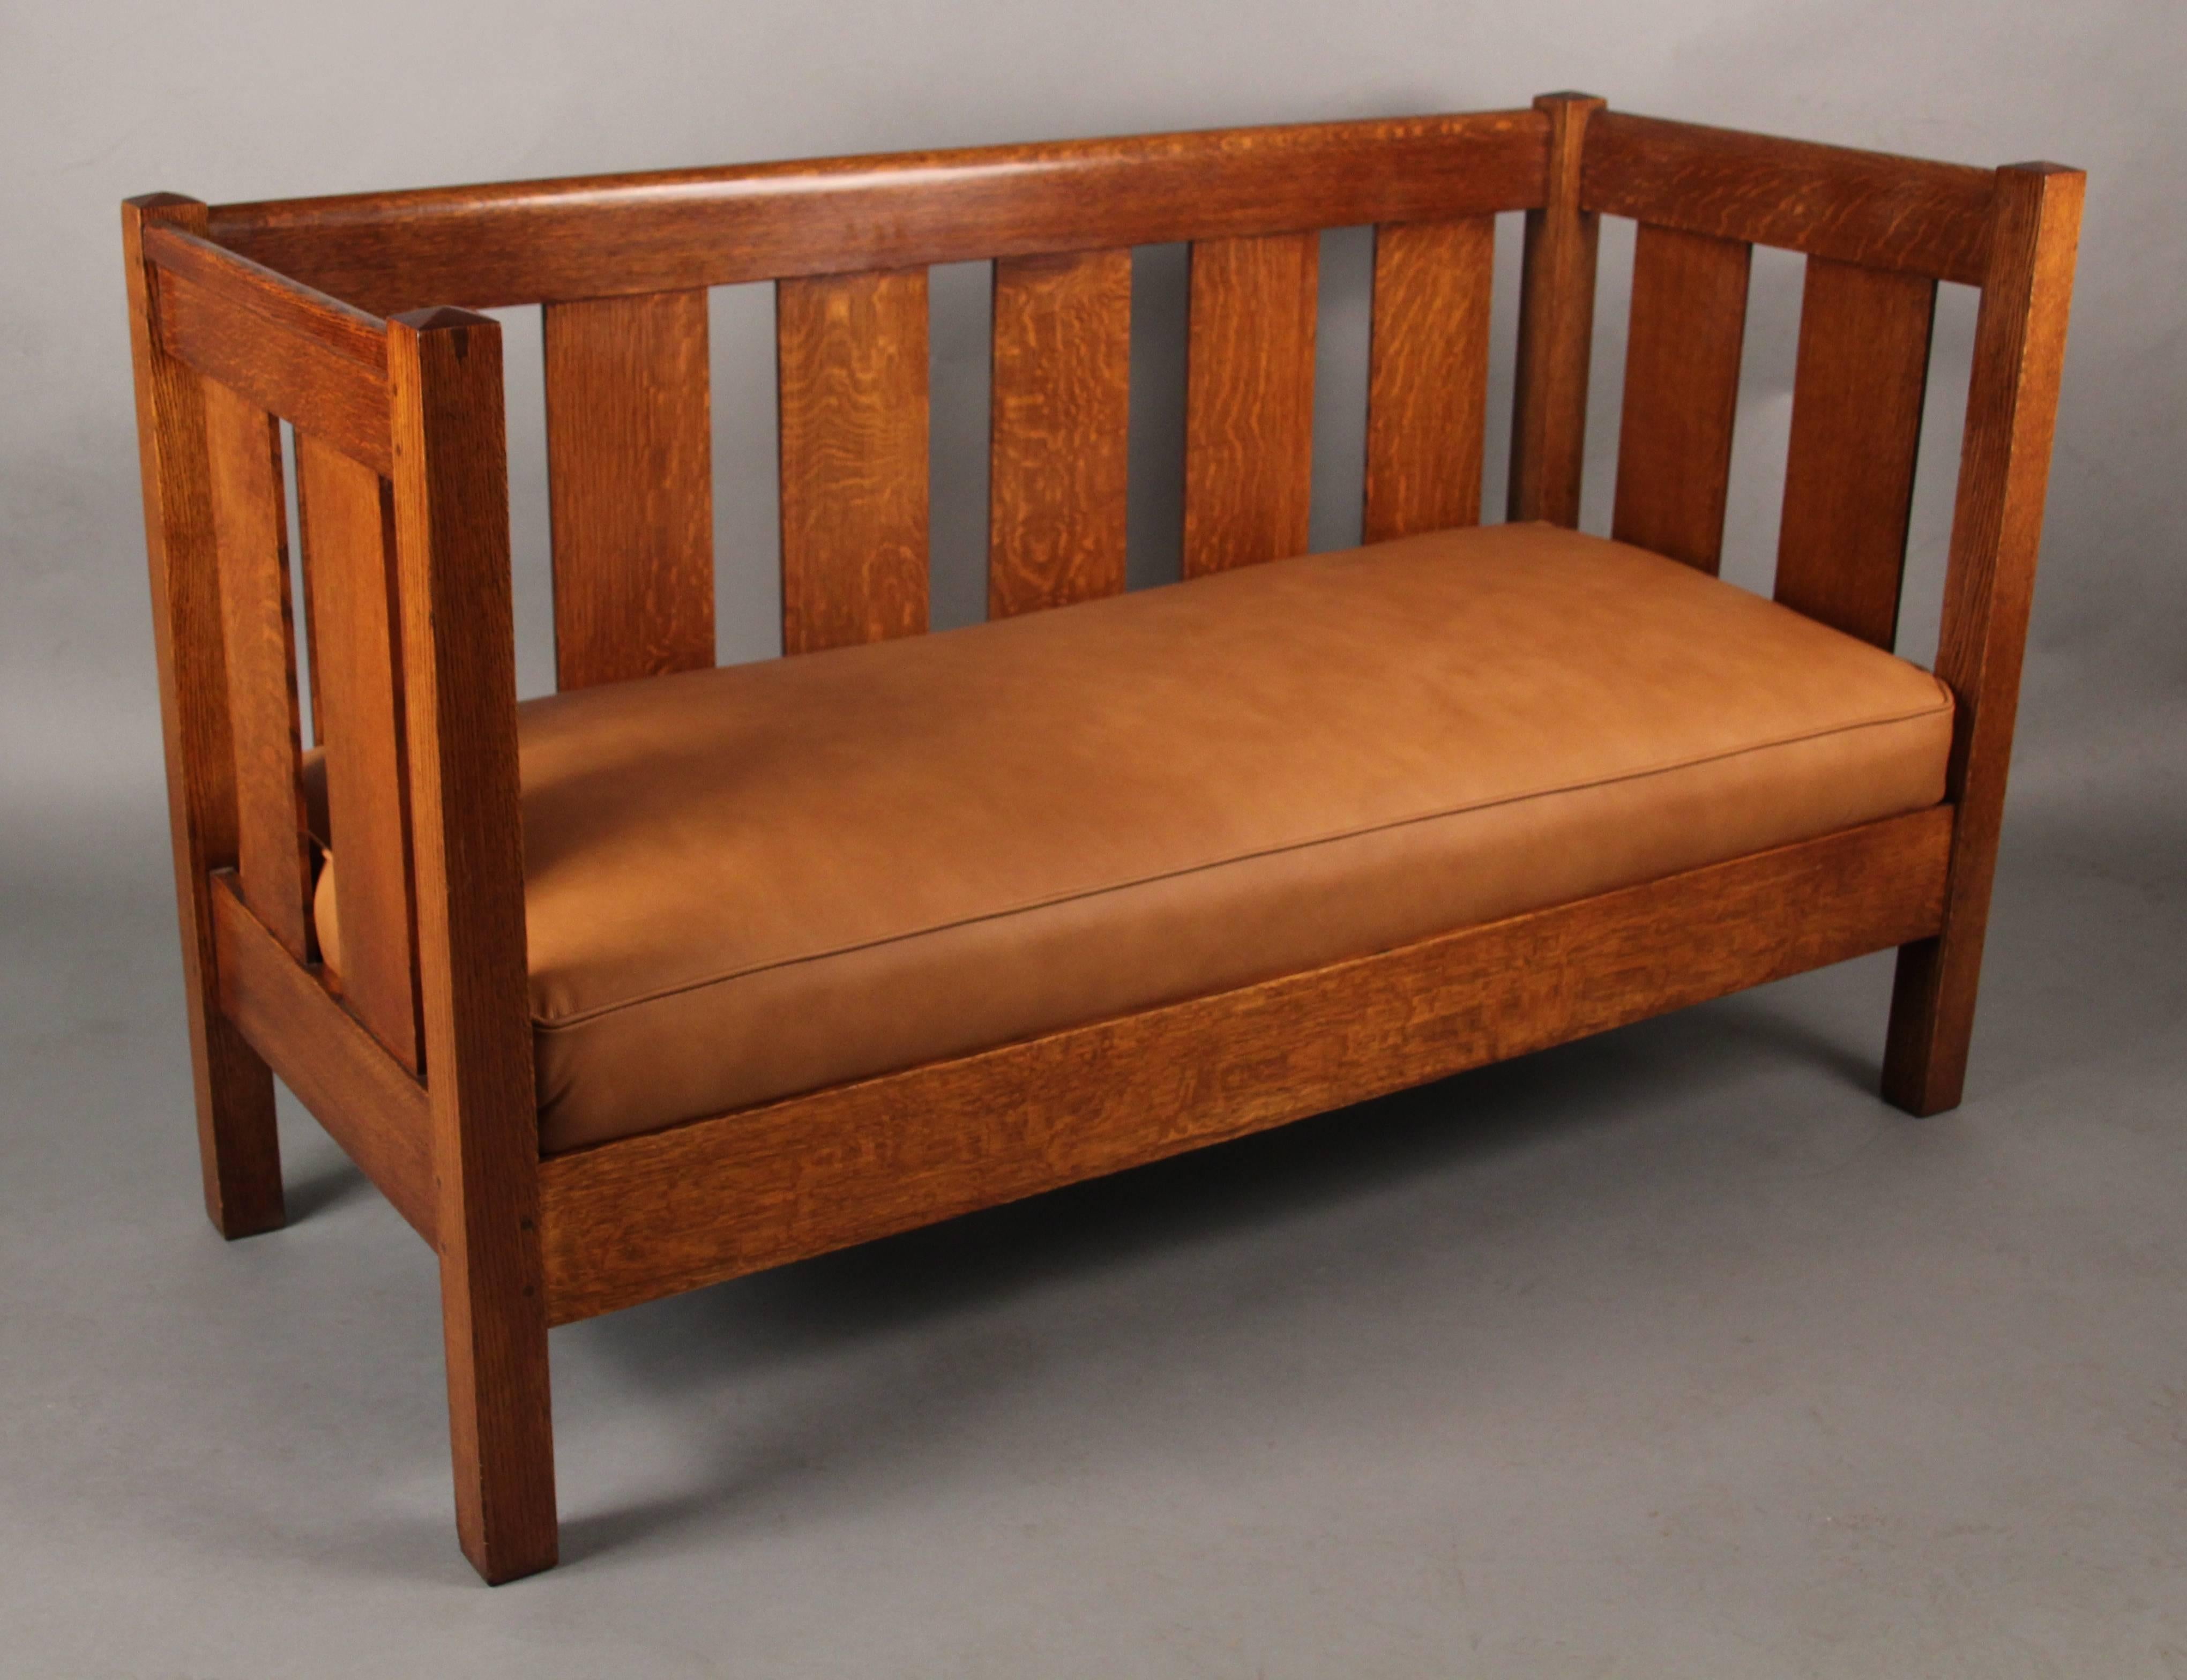 Classic Arts & Crafts settle recently upholstered in leather.